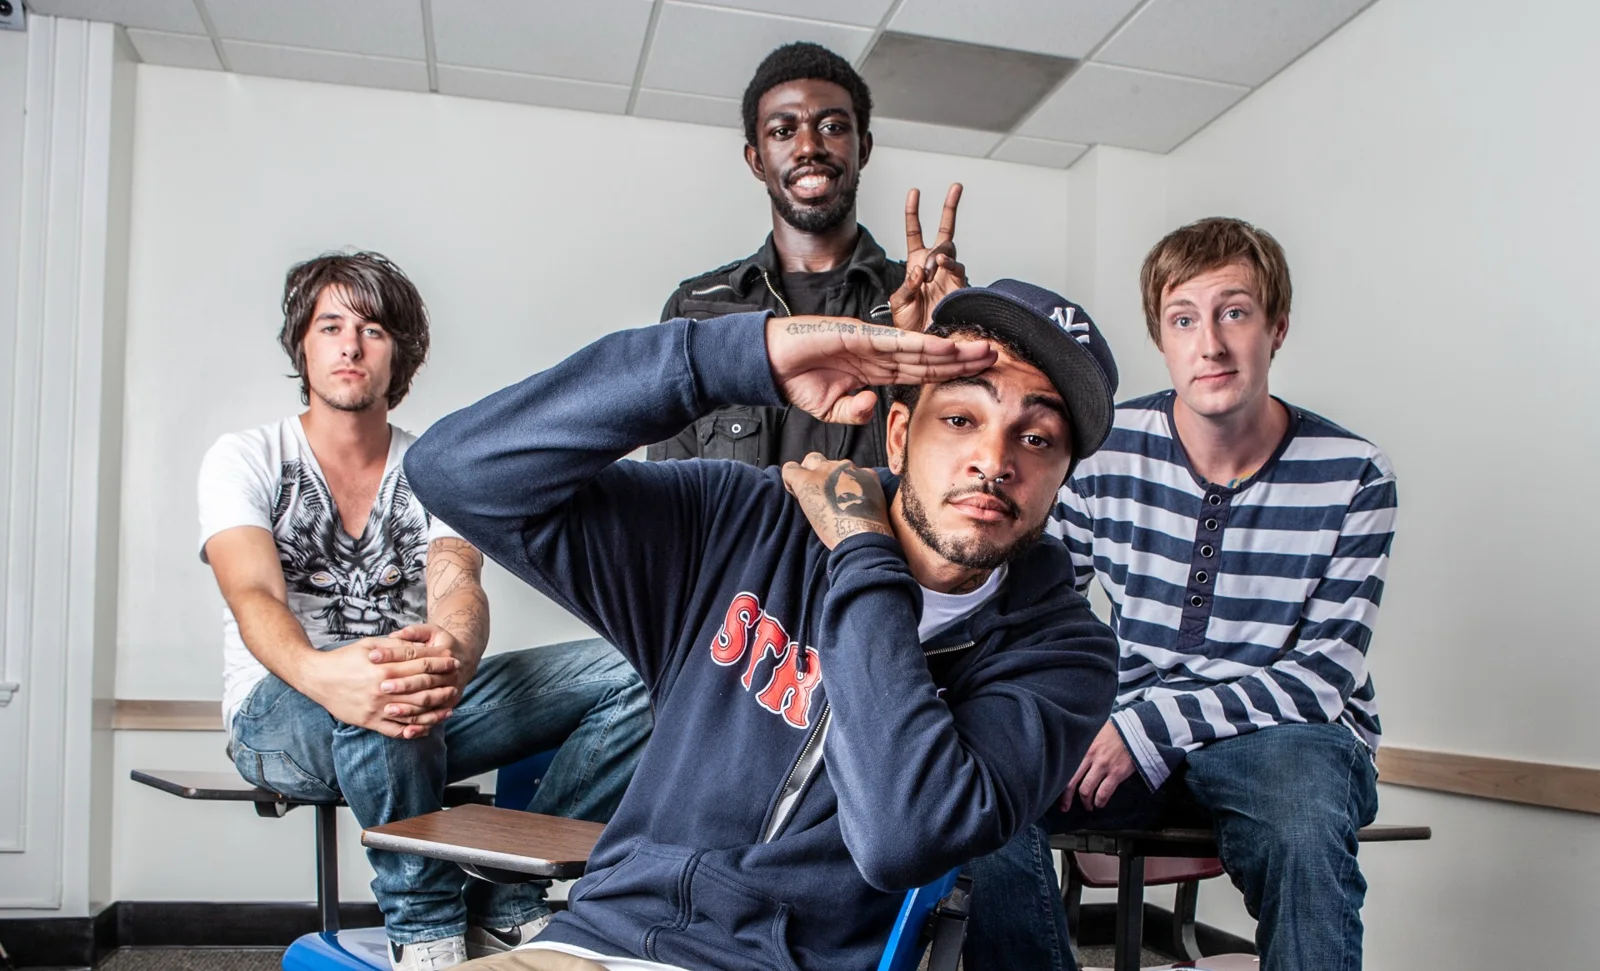 GYM CLASS HEROES (US) RAP-ROCKERS RETURN TO AUSTRALIA AND NEW ZEALAND FOR HEADLINE SHOWS THIS MARCH